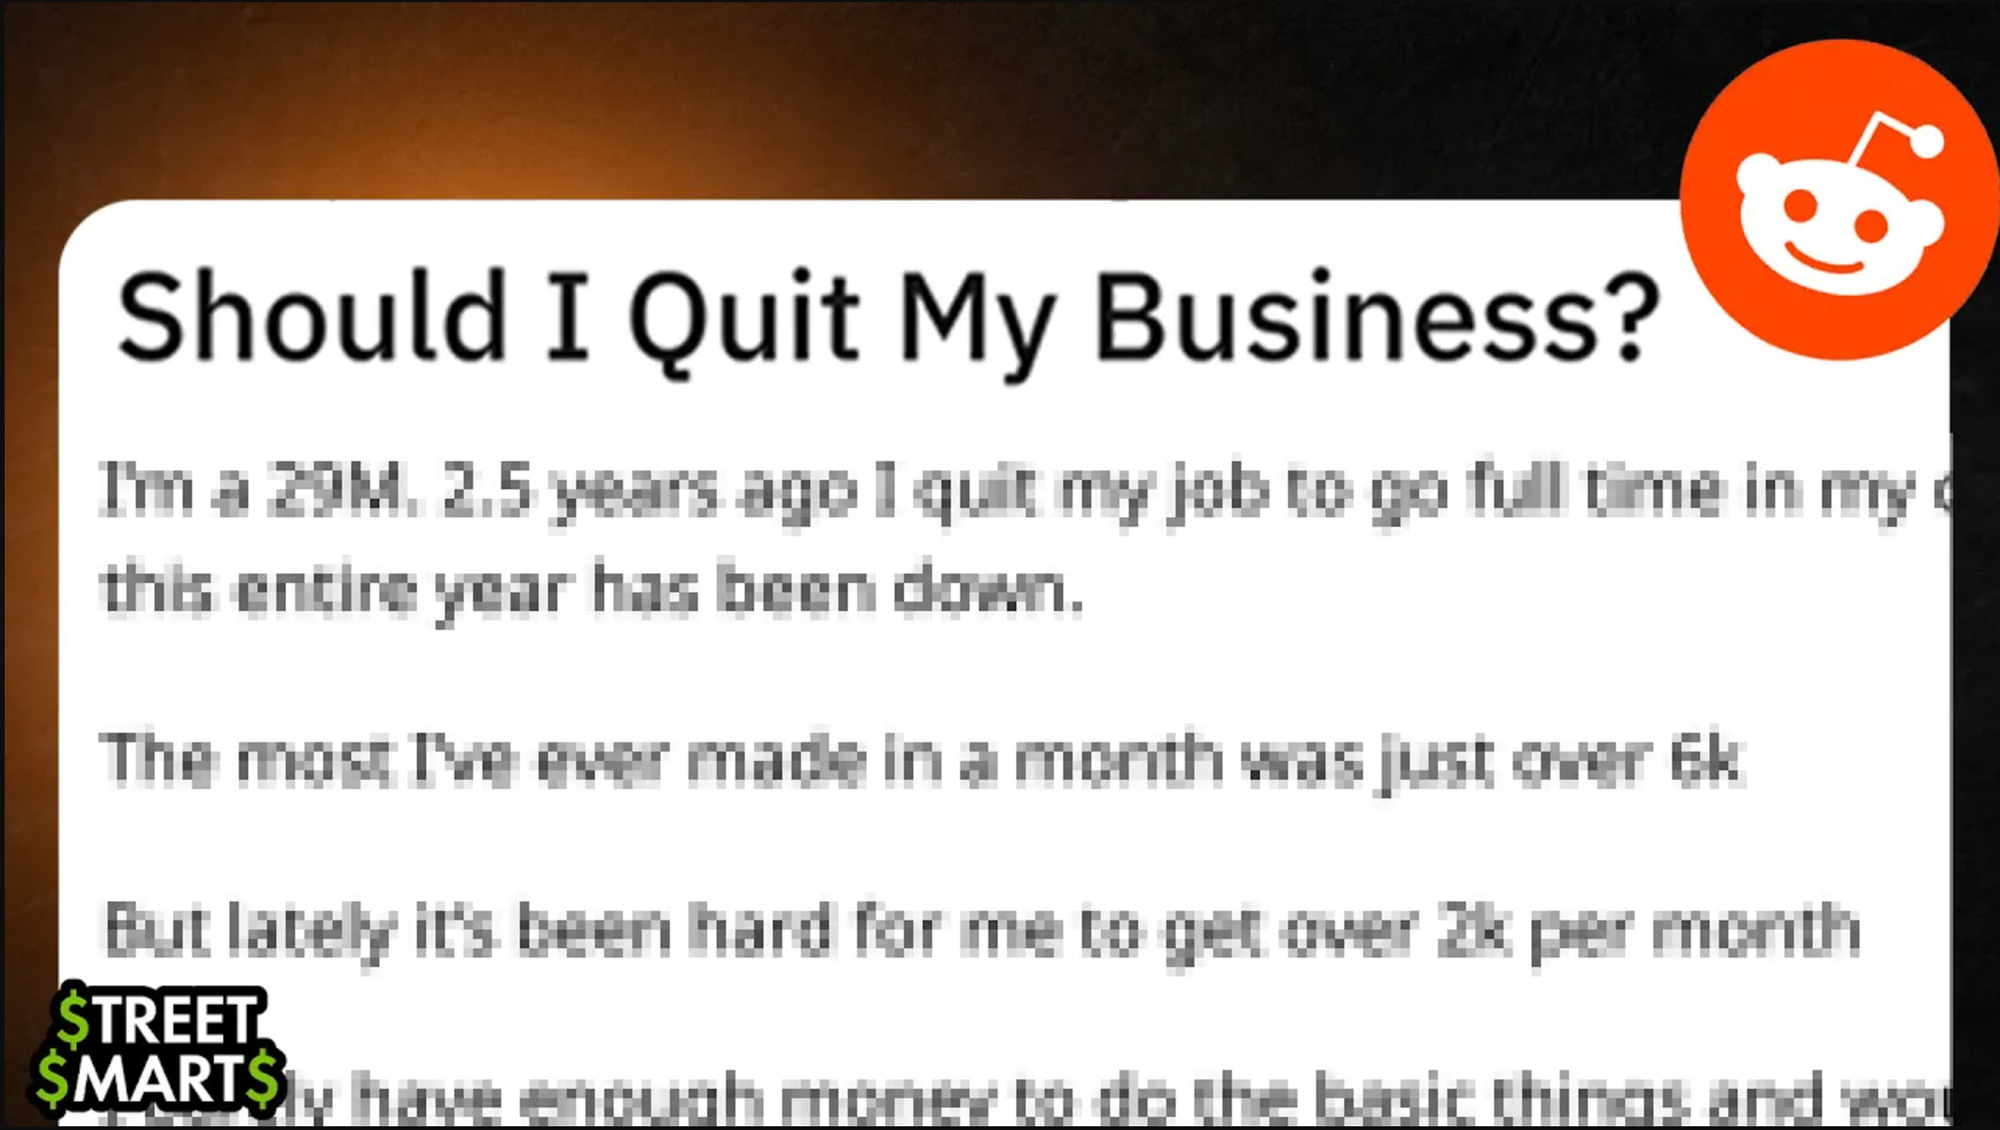 $treet $marts: You can't avoid this when starting a business...